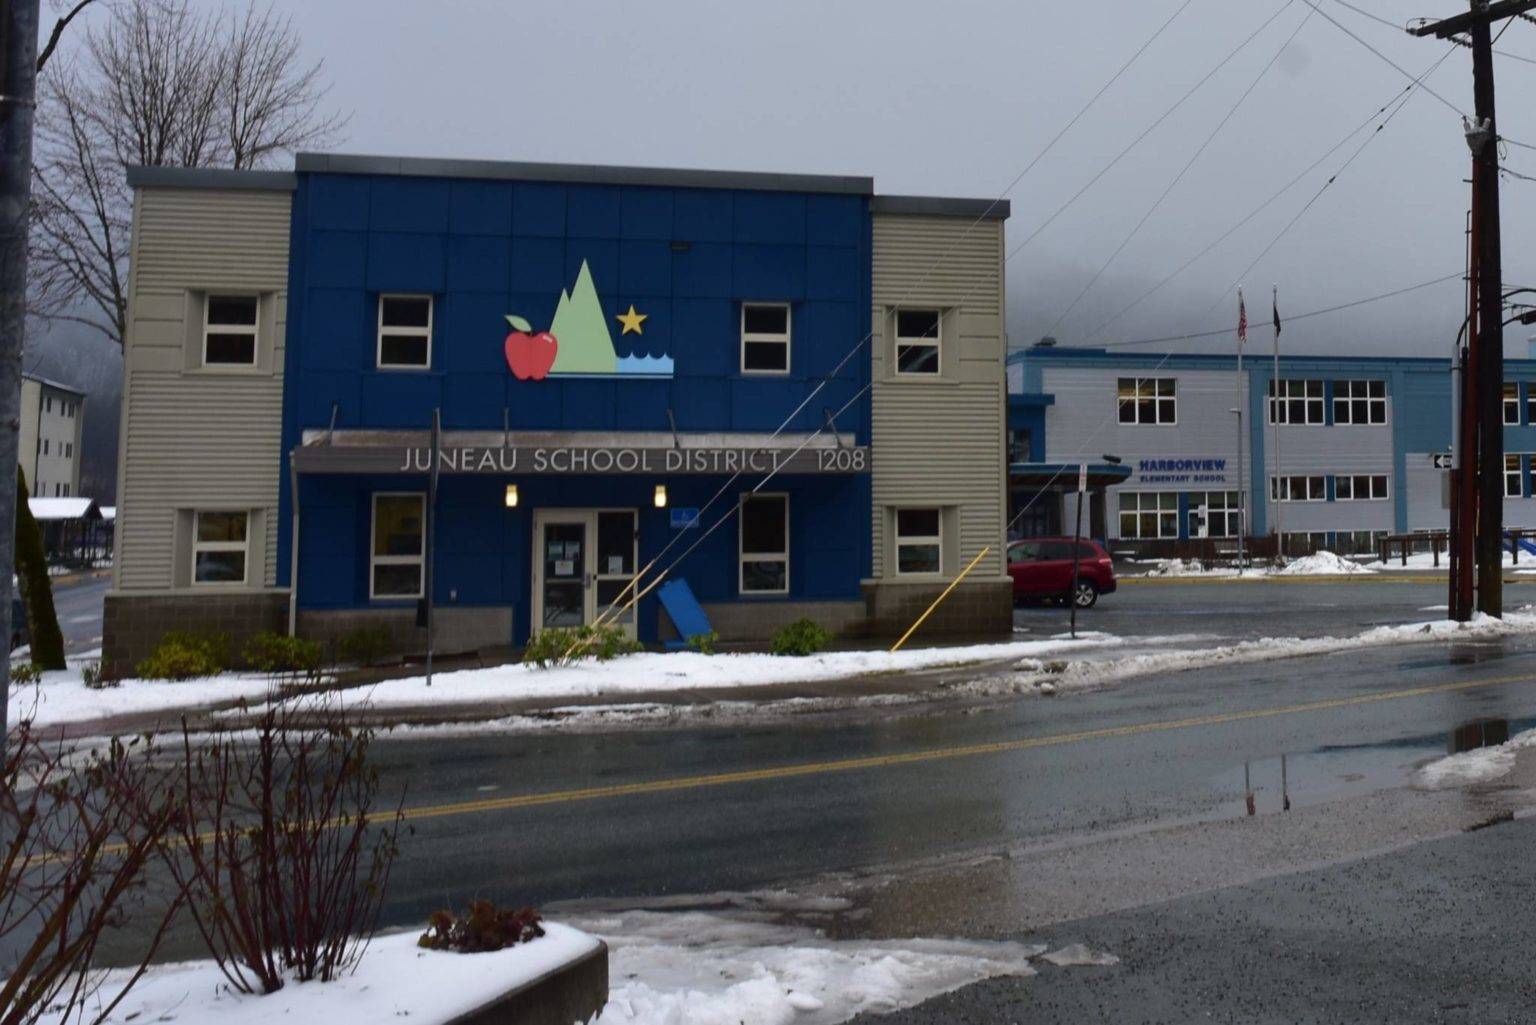 The Juneau School District building and Harborview Elementary School on Monday, Nov. 9, 2020. The district’s funding is stable for this year according to the Board of Education, but next year’s budget depends on the Legislature. (Peter Segall / Juneau Empire)